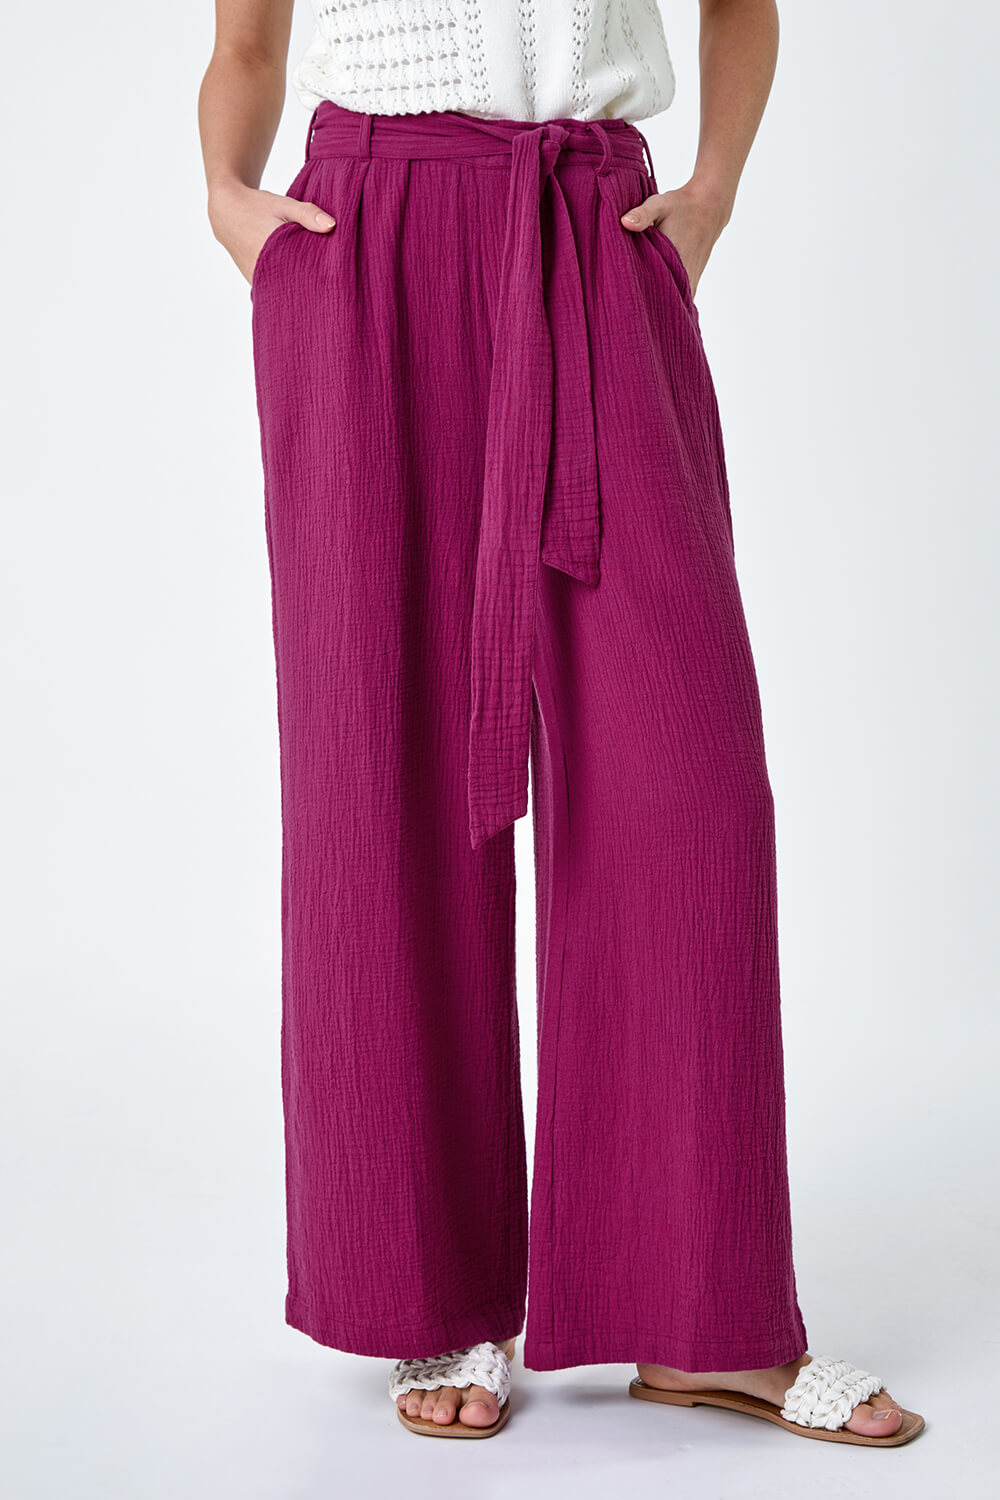 MAGENTA Textured Cotton Wide Leg Trousers, Image 4 of 5